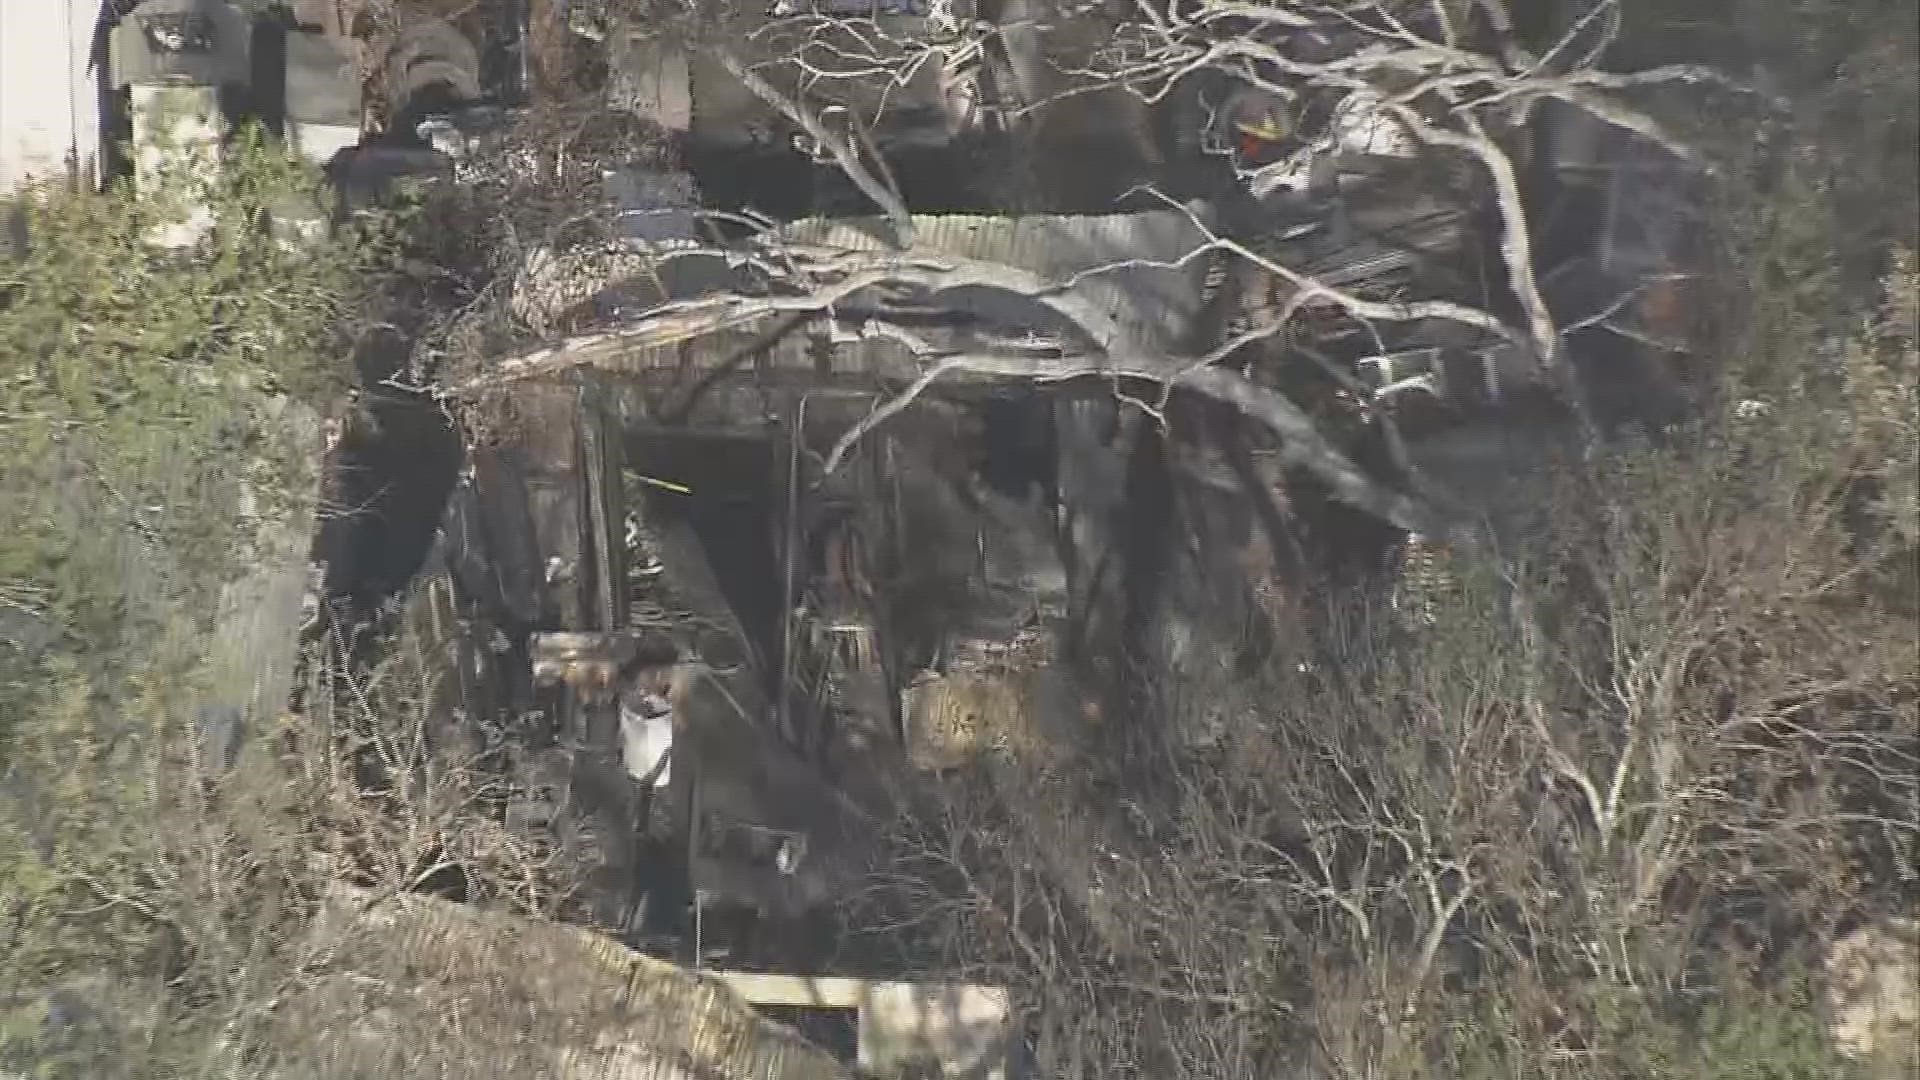 The remains are so charred that San Antonio's code enforcement division is pushing for the property to be razed.